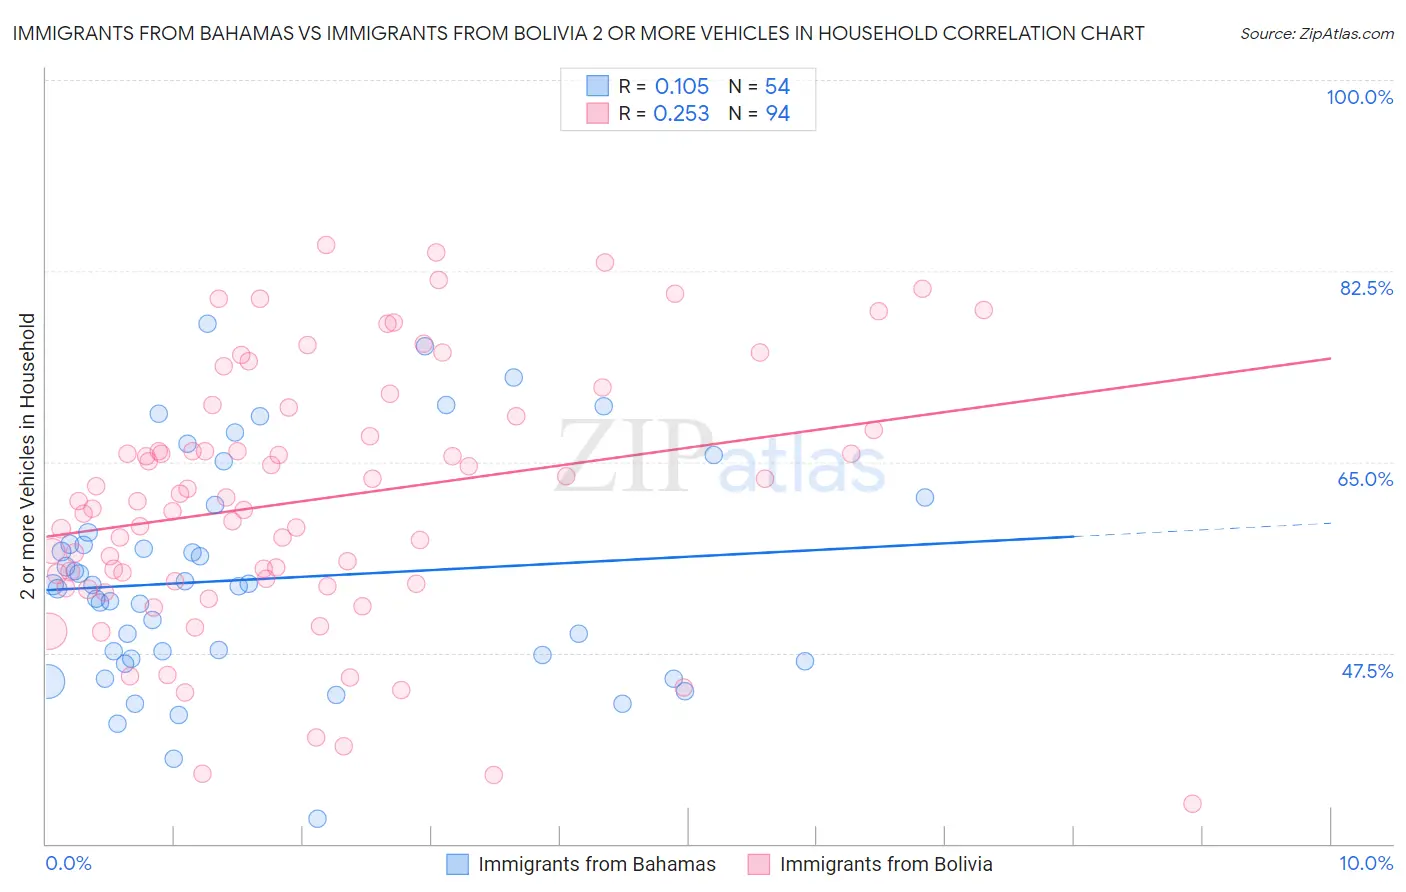 Immigrants from Bahamas vs Immigrants from Bolivia 2 or more Vehicles in Household